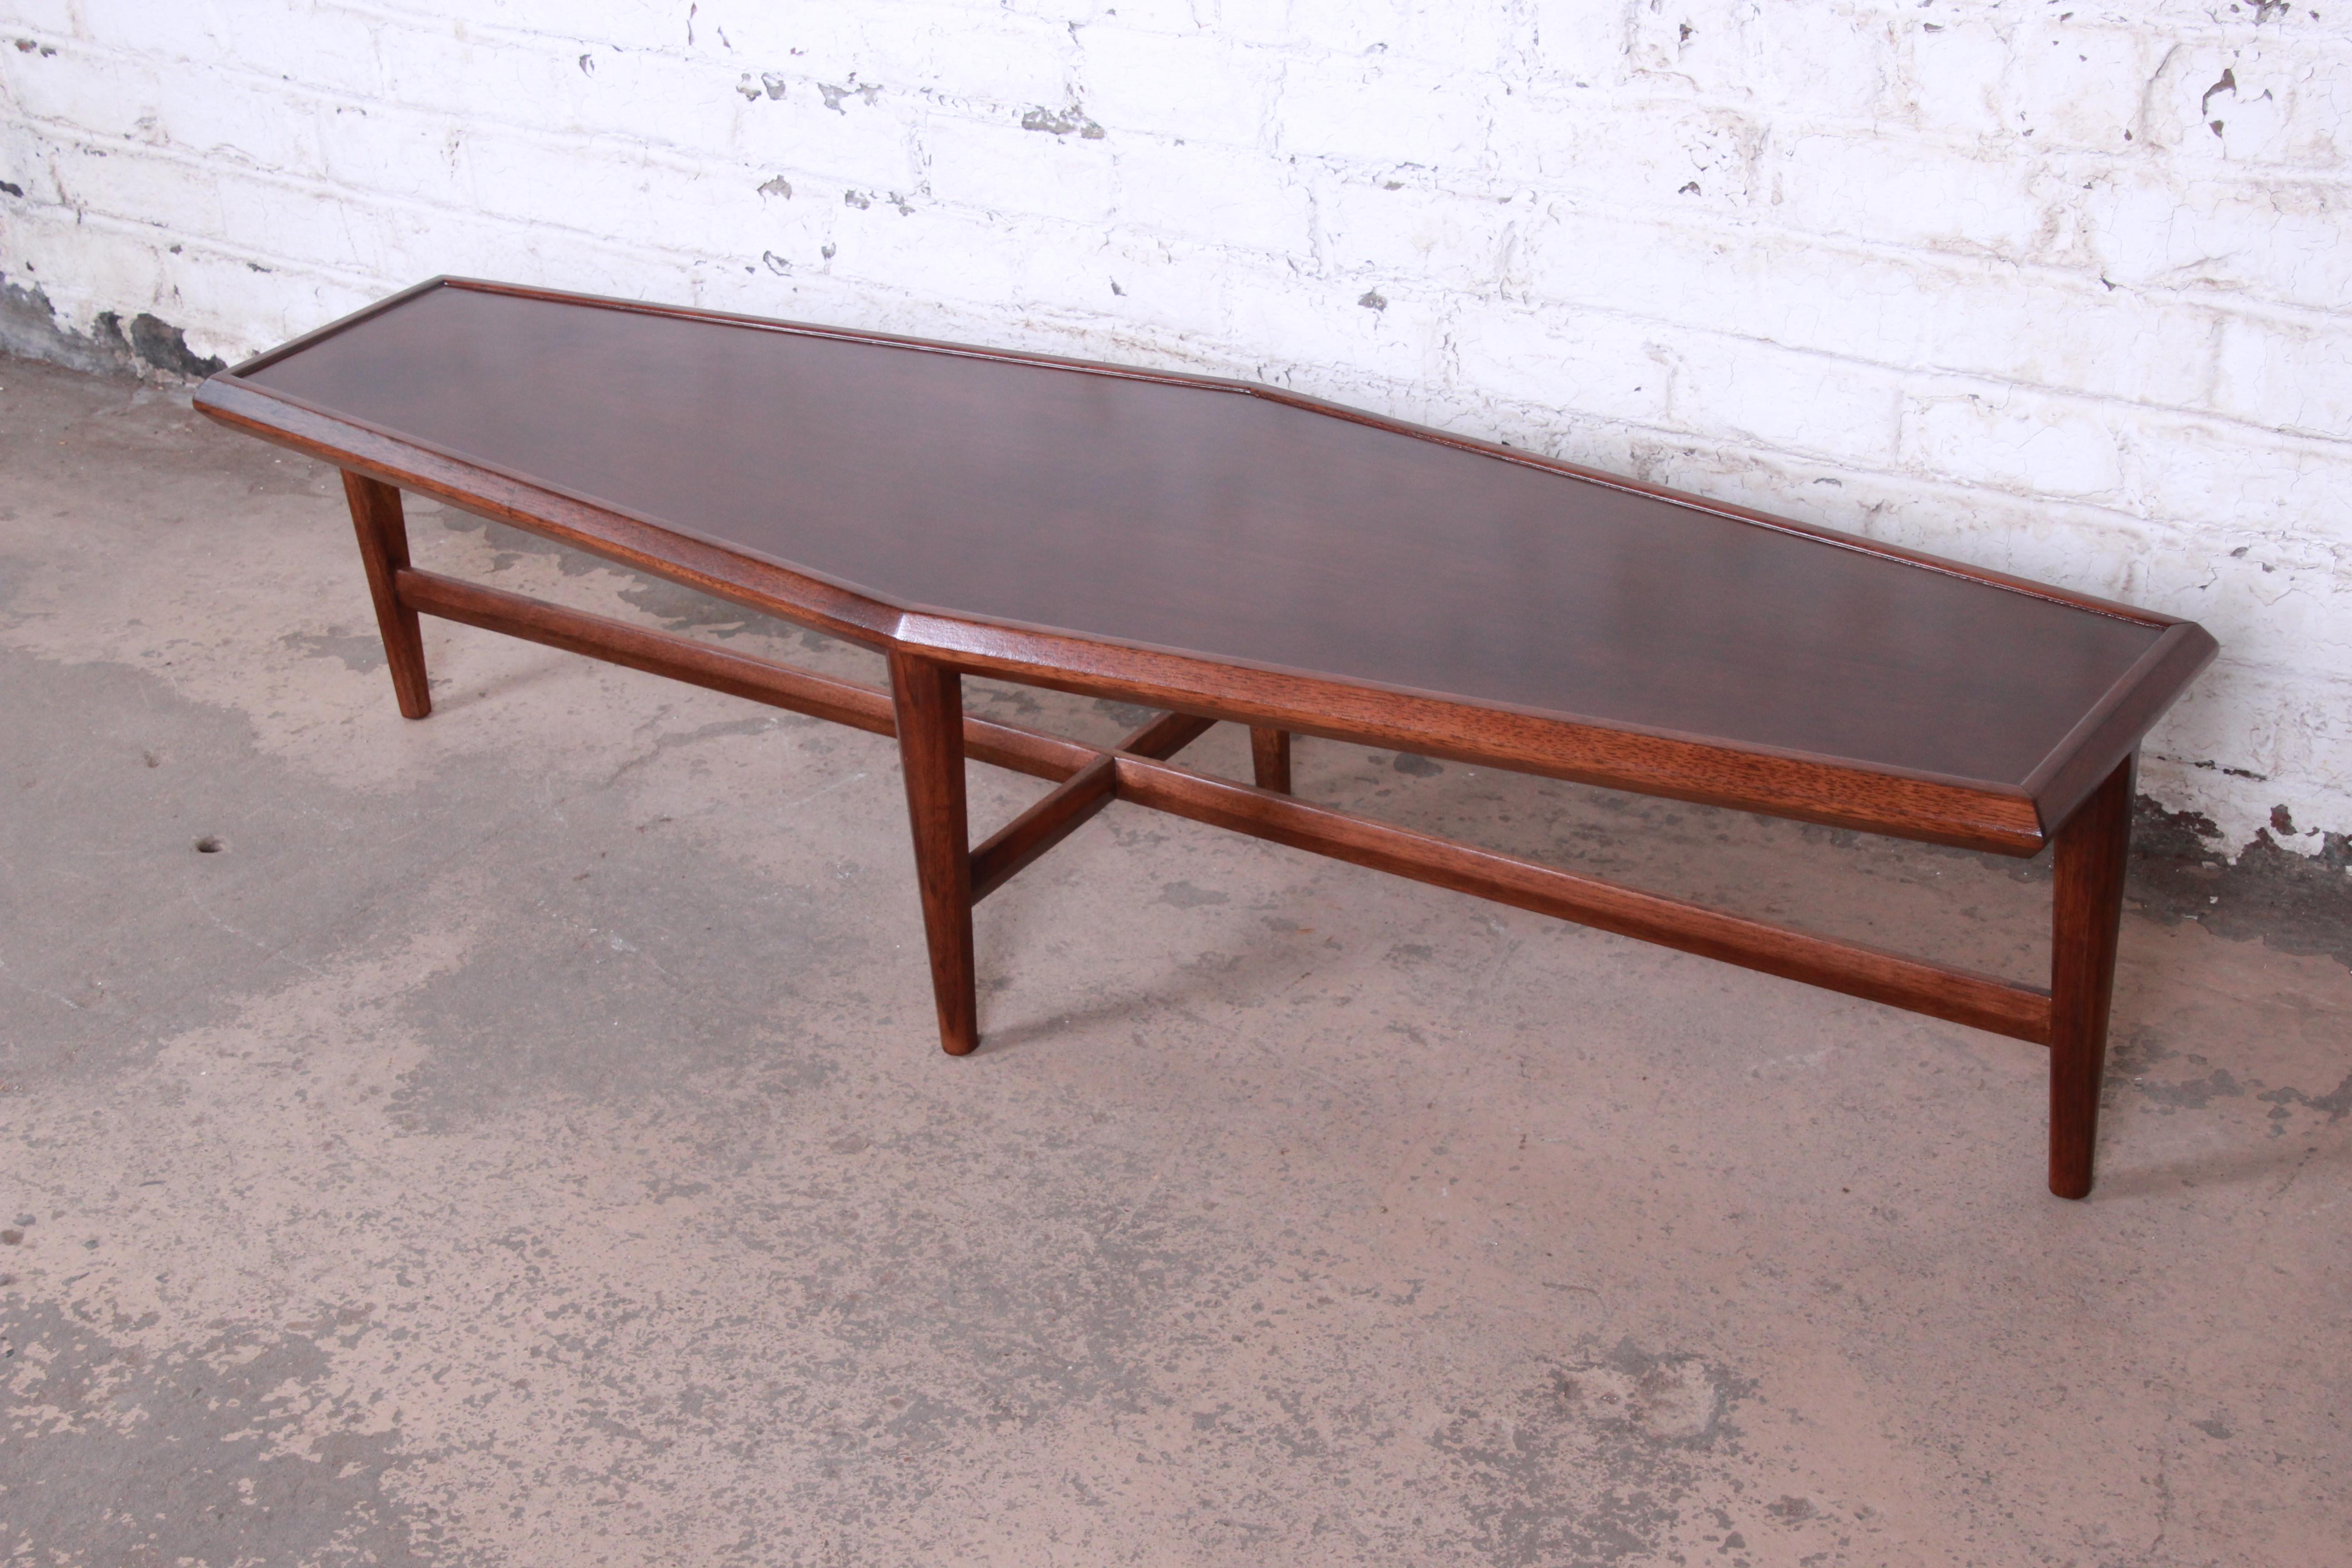 An exceptional Mid-Century Modern boat-shaped coffee or cocktail table by Drexel Heritage. The table features stunning walnut wood grain, with sculpted solid walnut legs and stretchers. It has a unique boat-shaped top. The original label is present